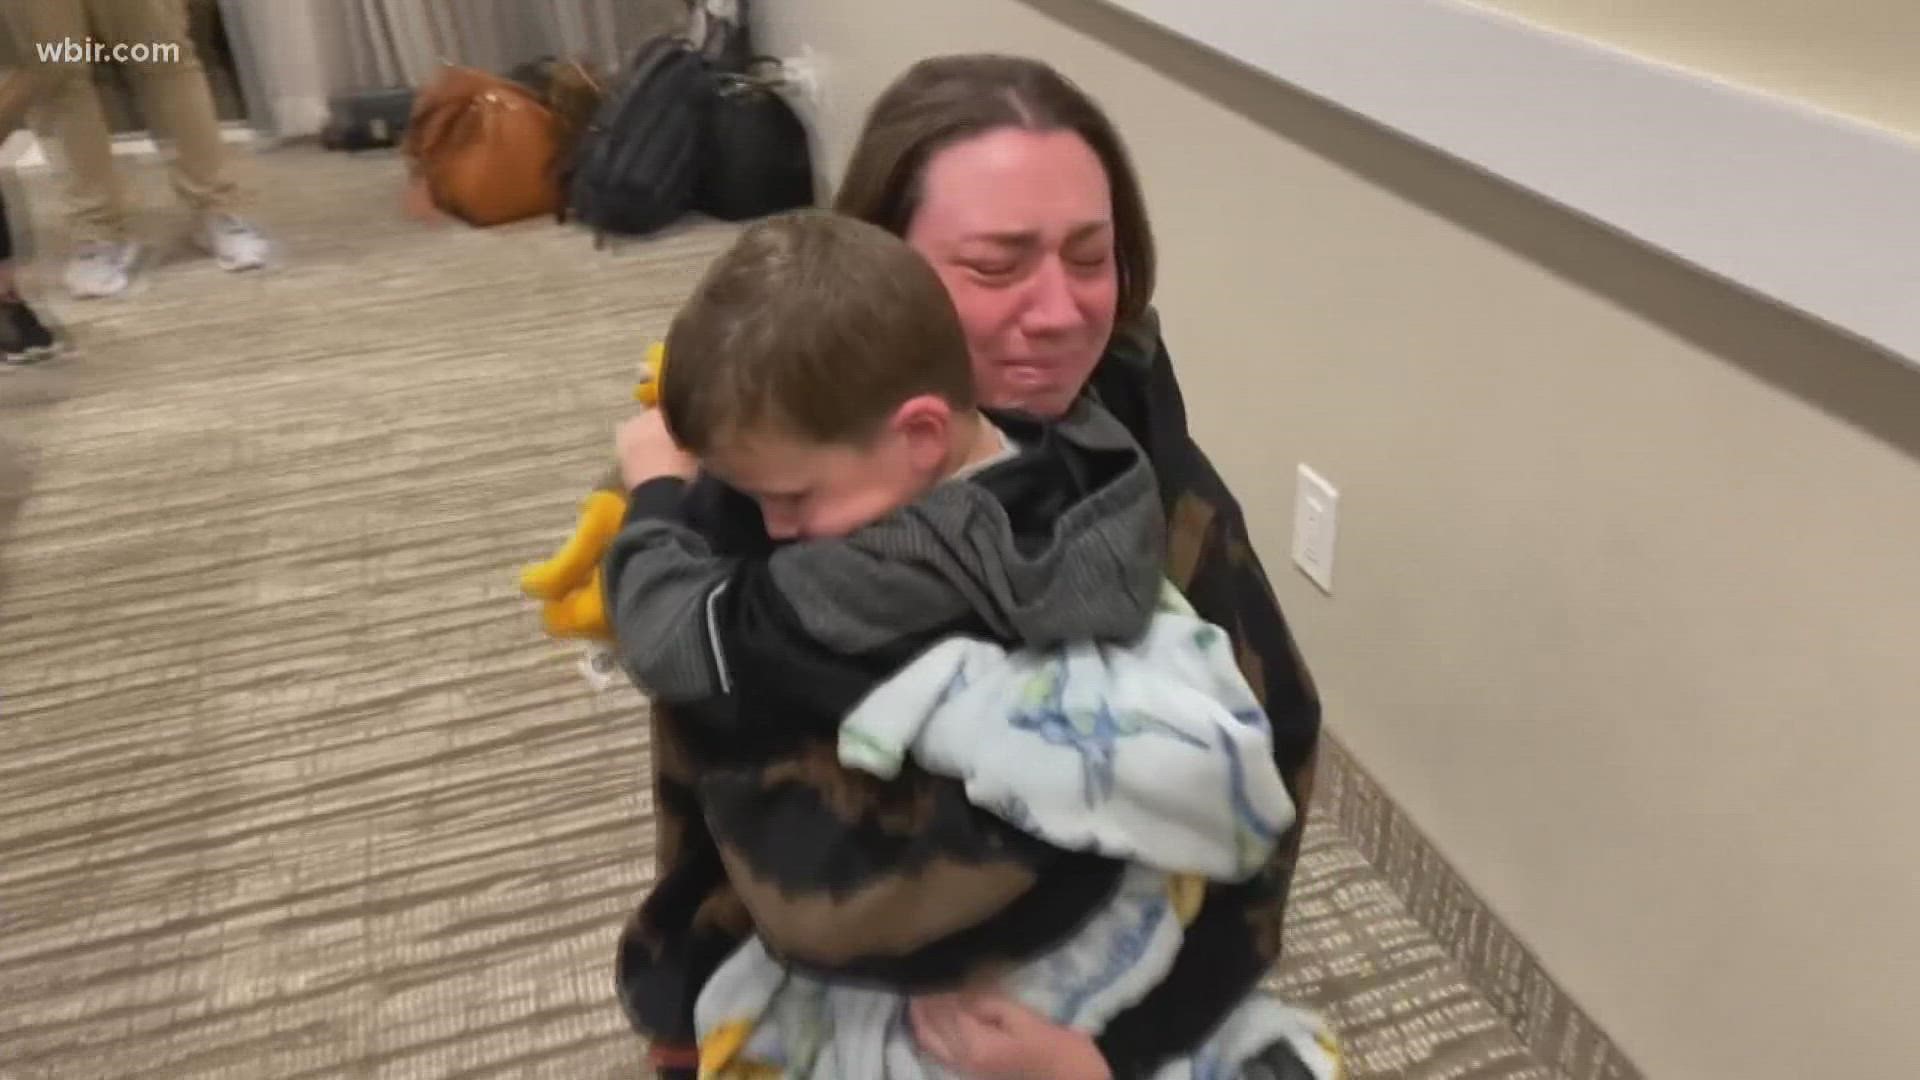 Missing 3-year-old Tennessee boy reunited with his mother in California after AMBER Alert search | wbir.com